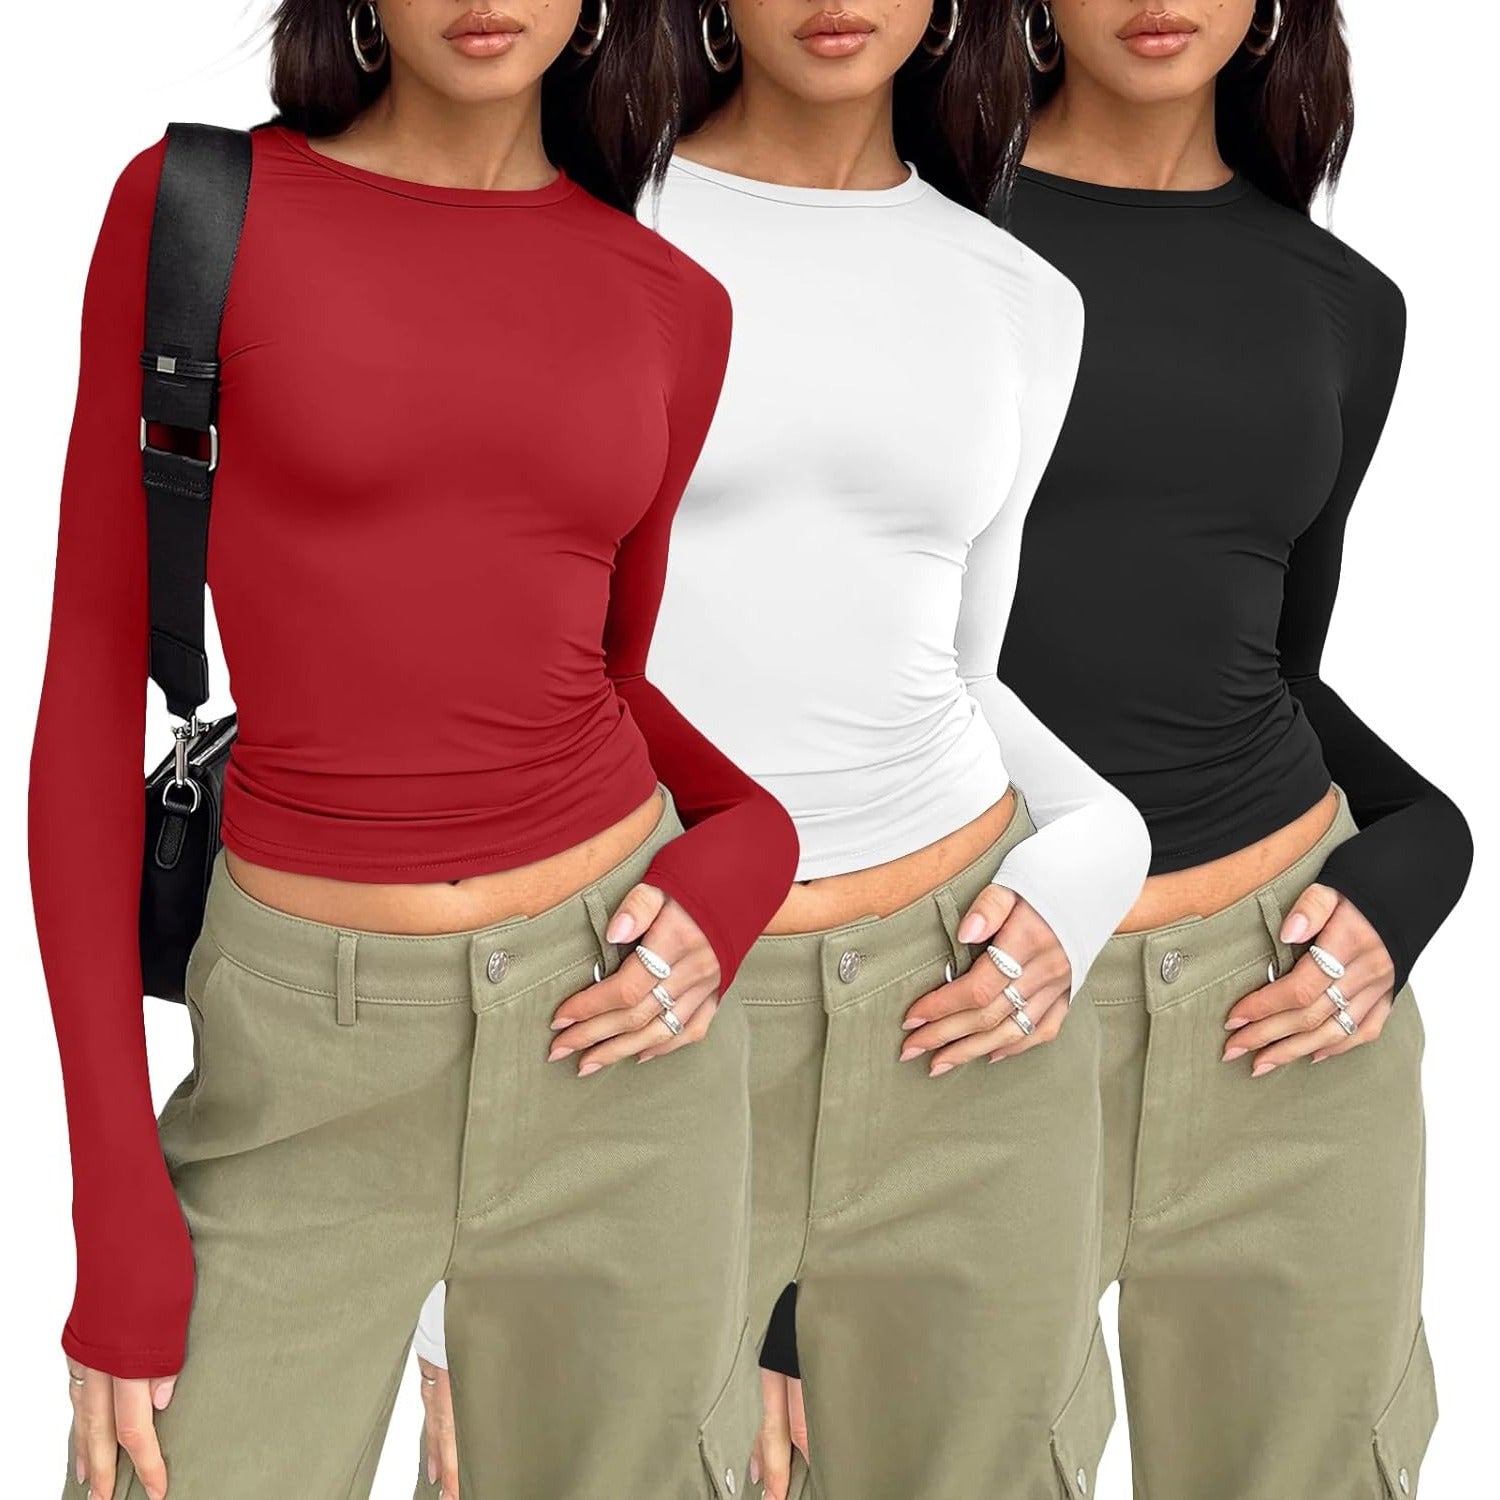 Womens 3 Piece Long Sleeve Shirts Basic Crop Tops Going Out Fall Fashion Underscrubs Layer Slim Fit Y2K Tops